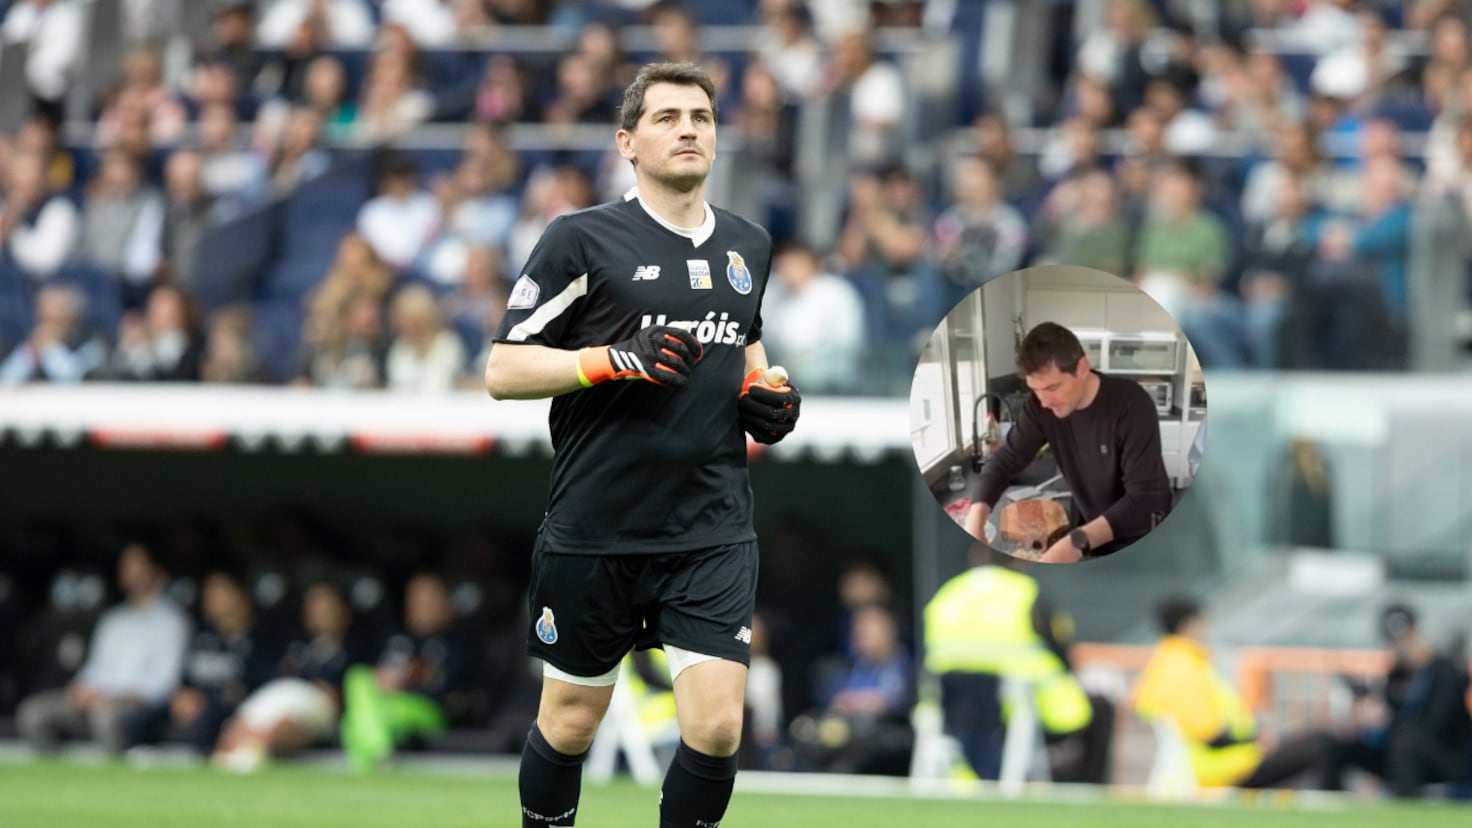 Iker Casillas goes into the kitchen and is showered with ridicule from his friends: What a joke...
